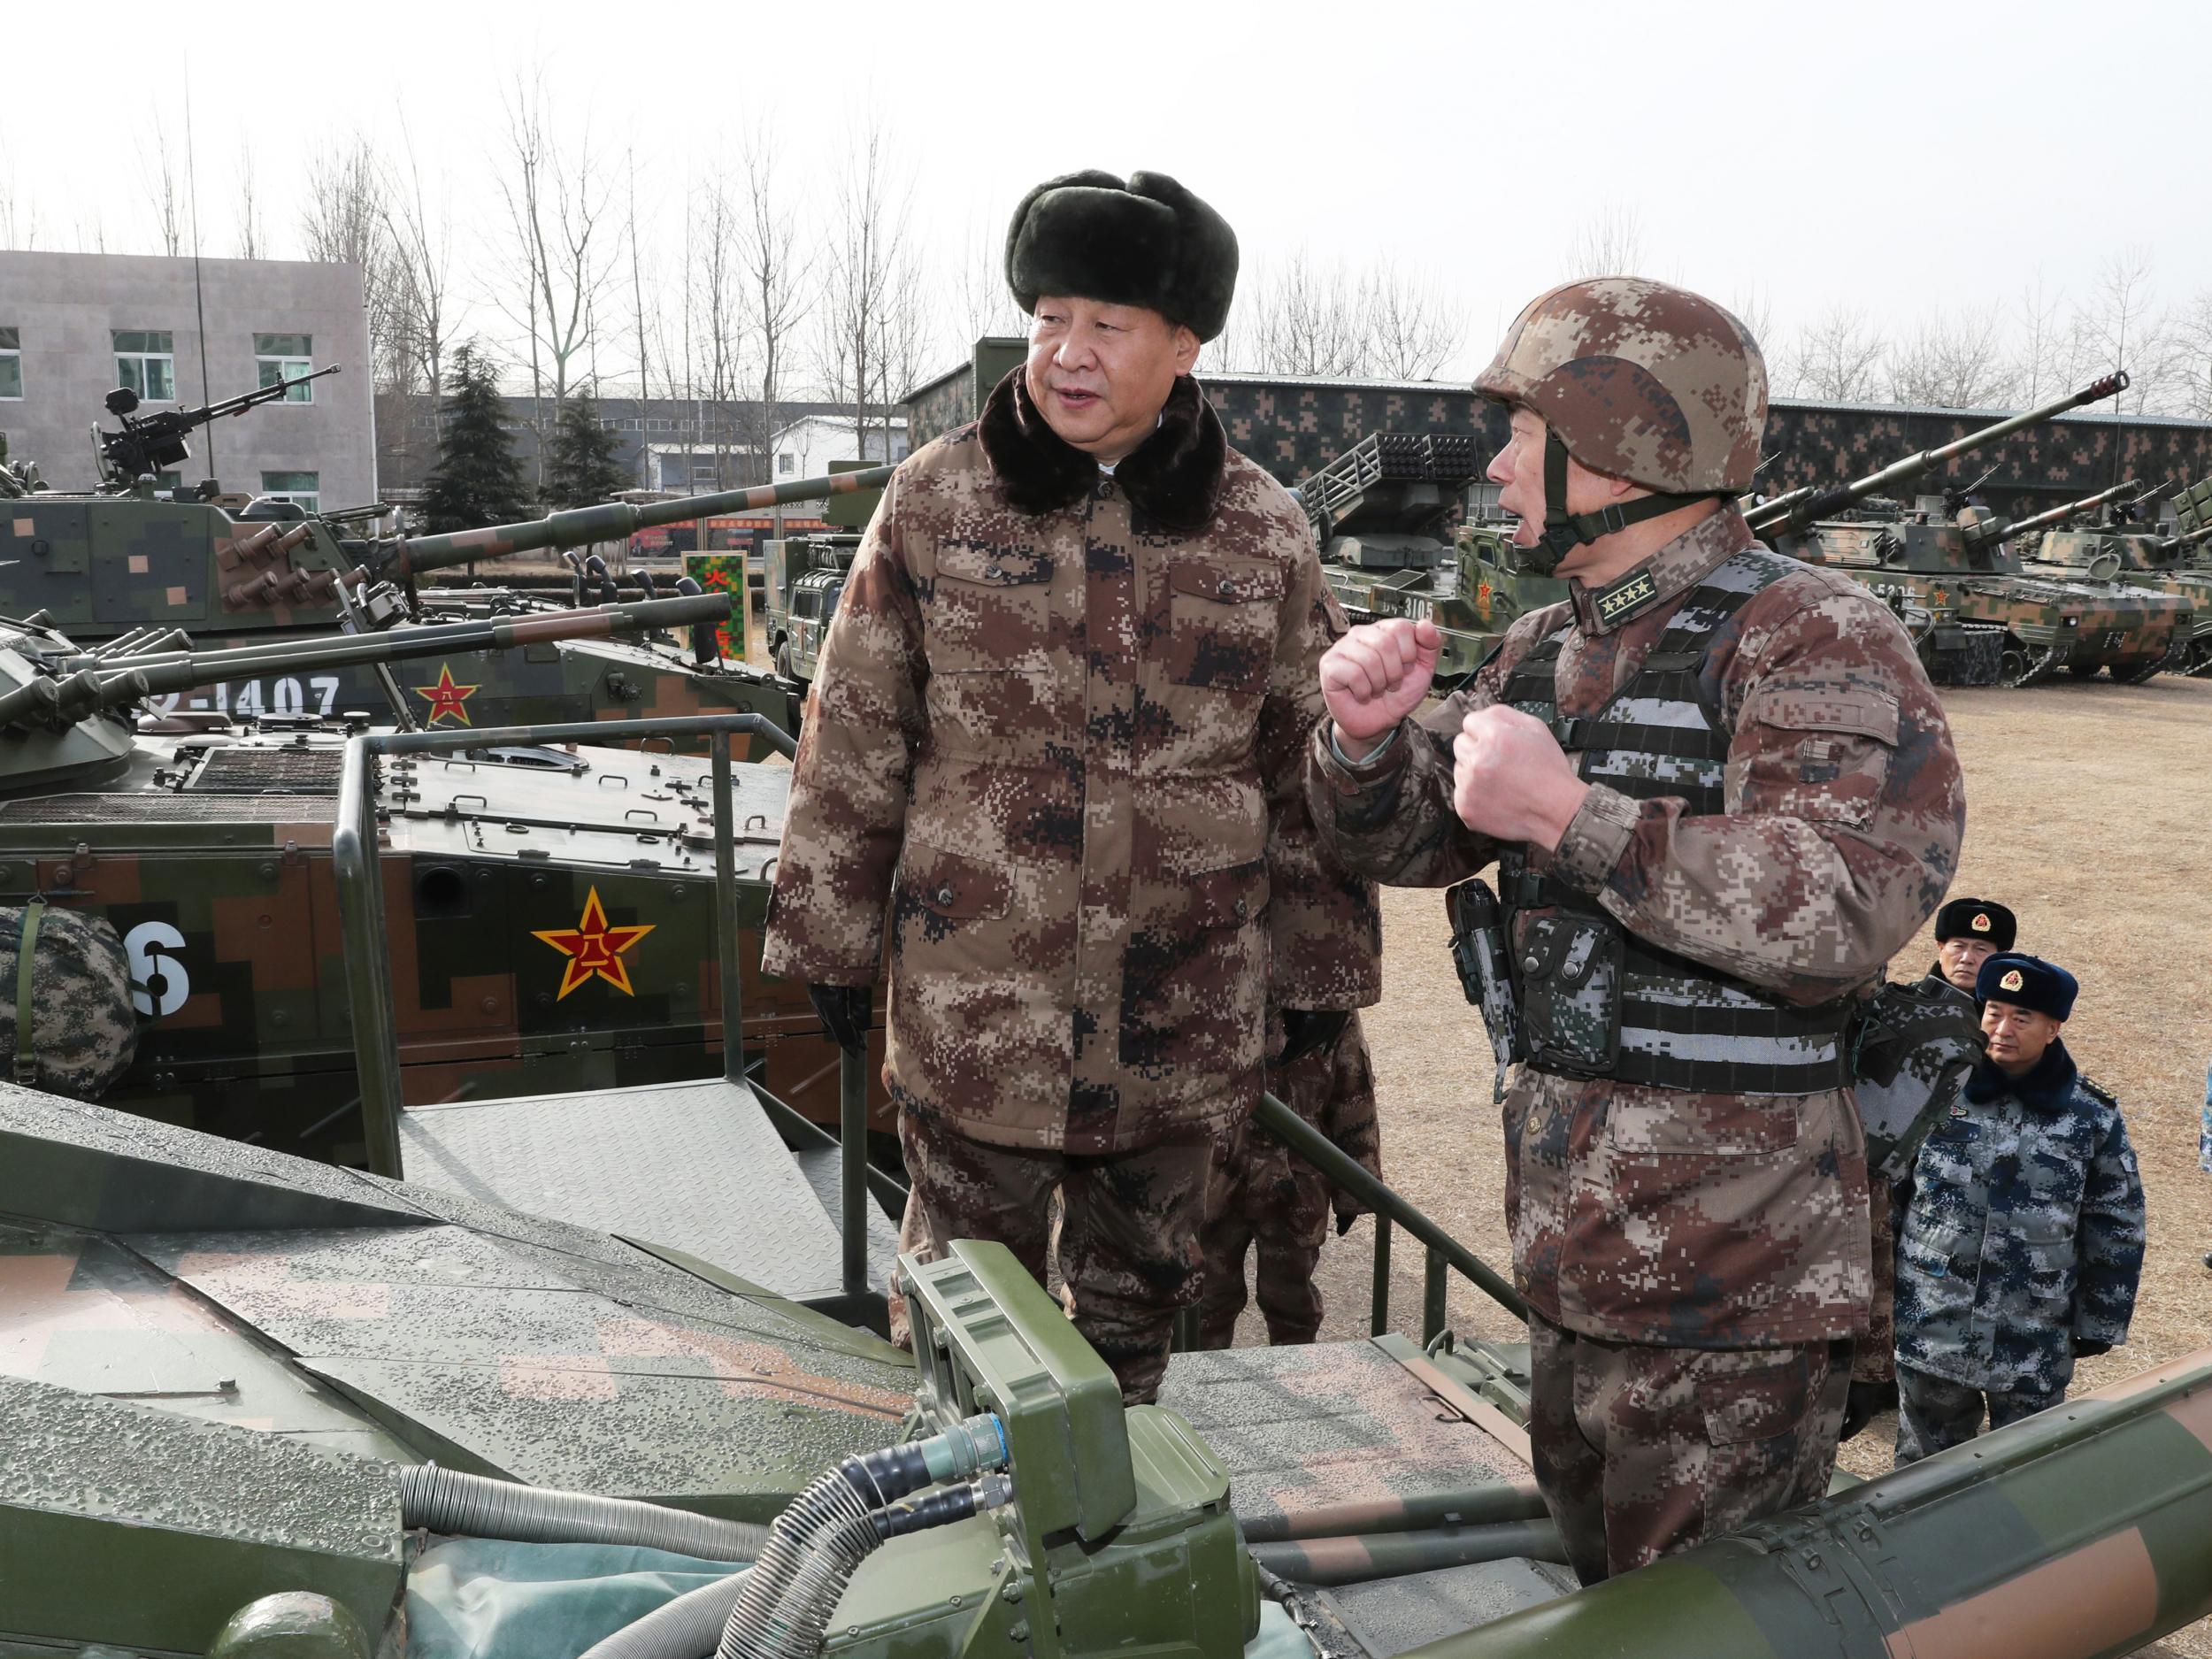 Xi Jinping (left) inspecting tanks ahead of the military parade in Heibei